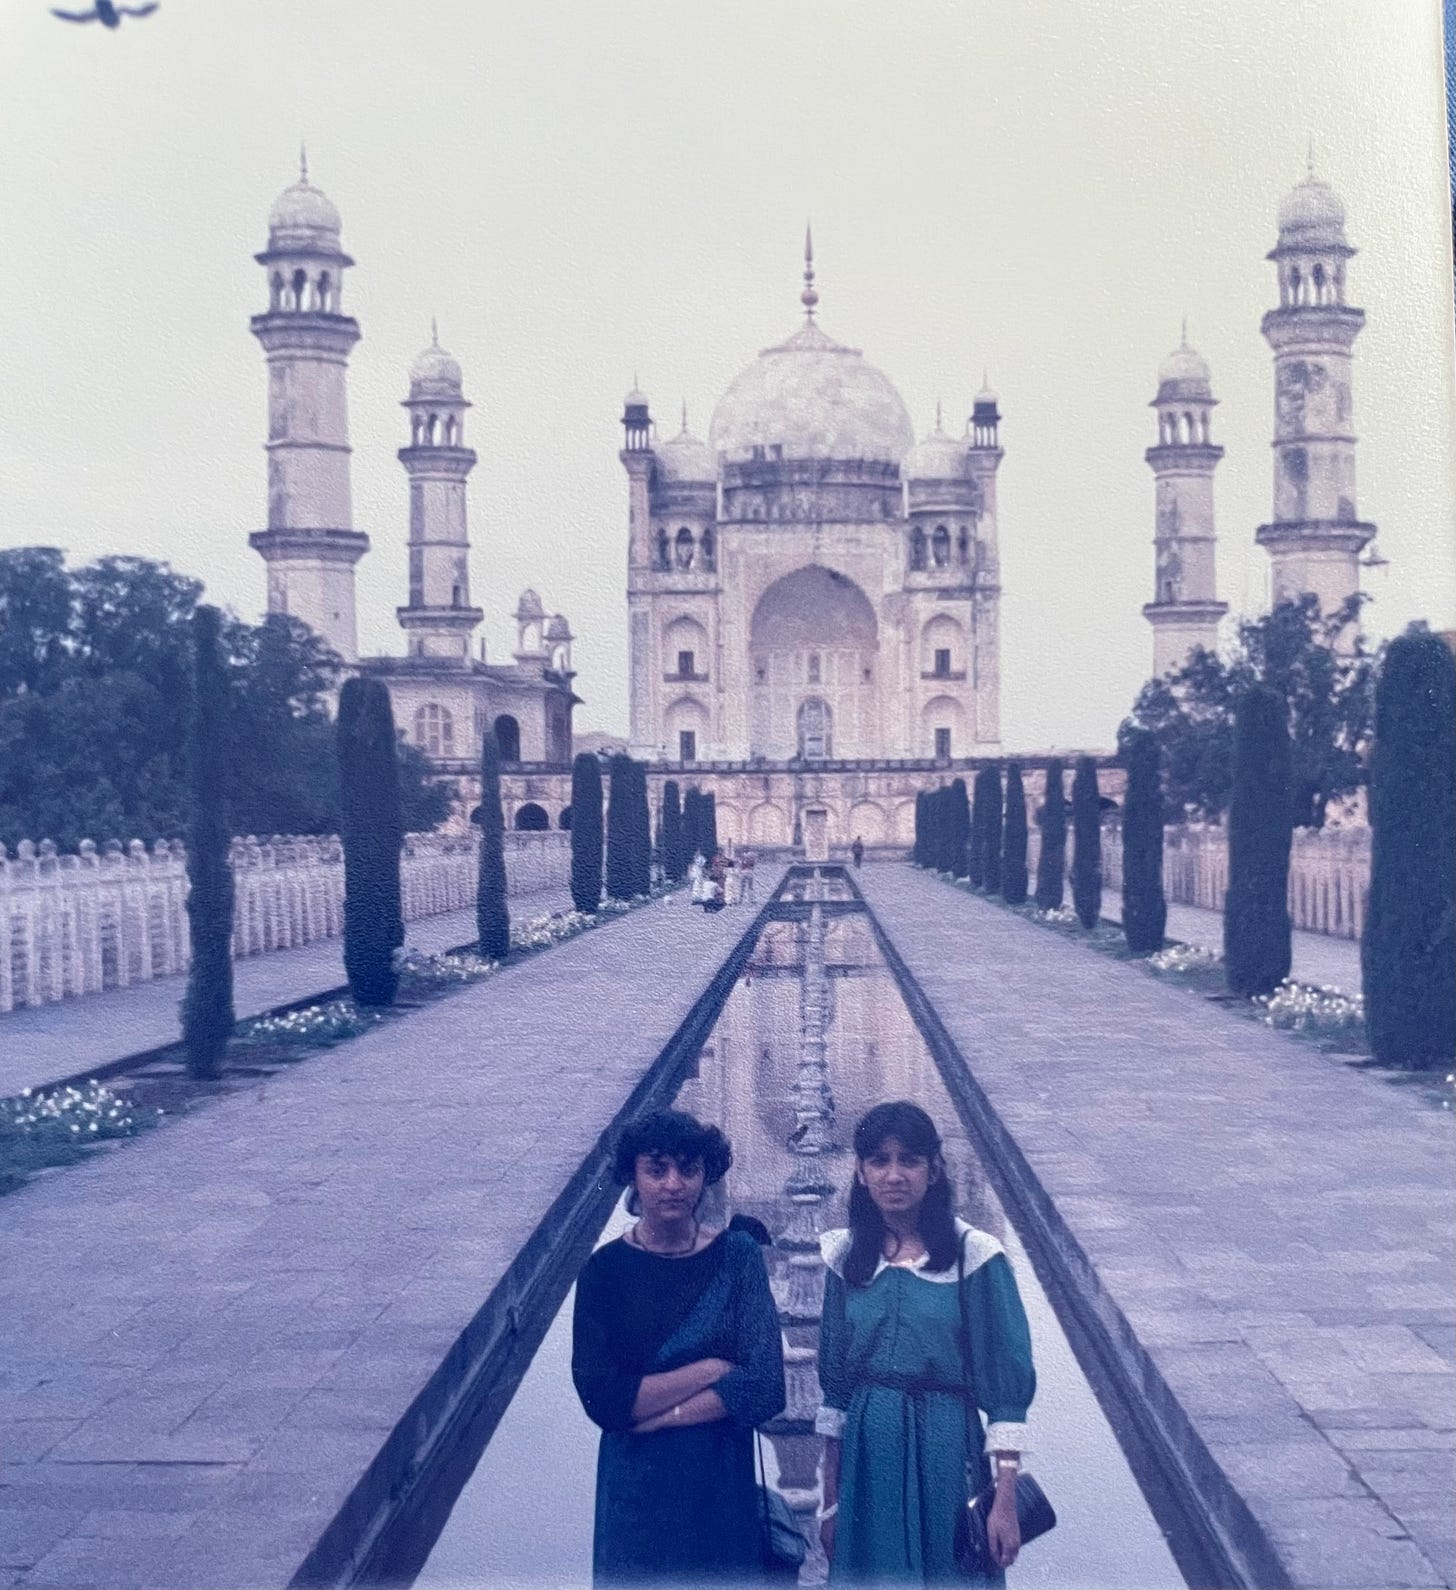 Two teenage Indian women wear dark dresses and stand in front of the Taj Mahal